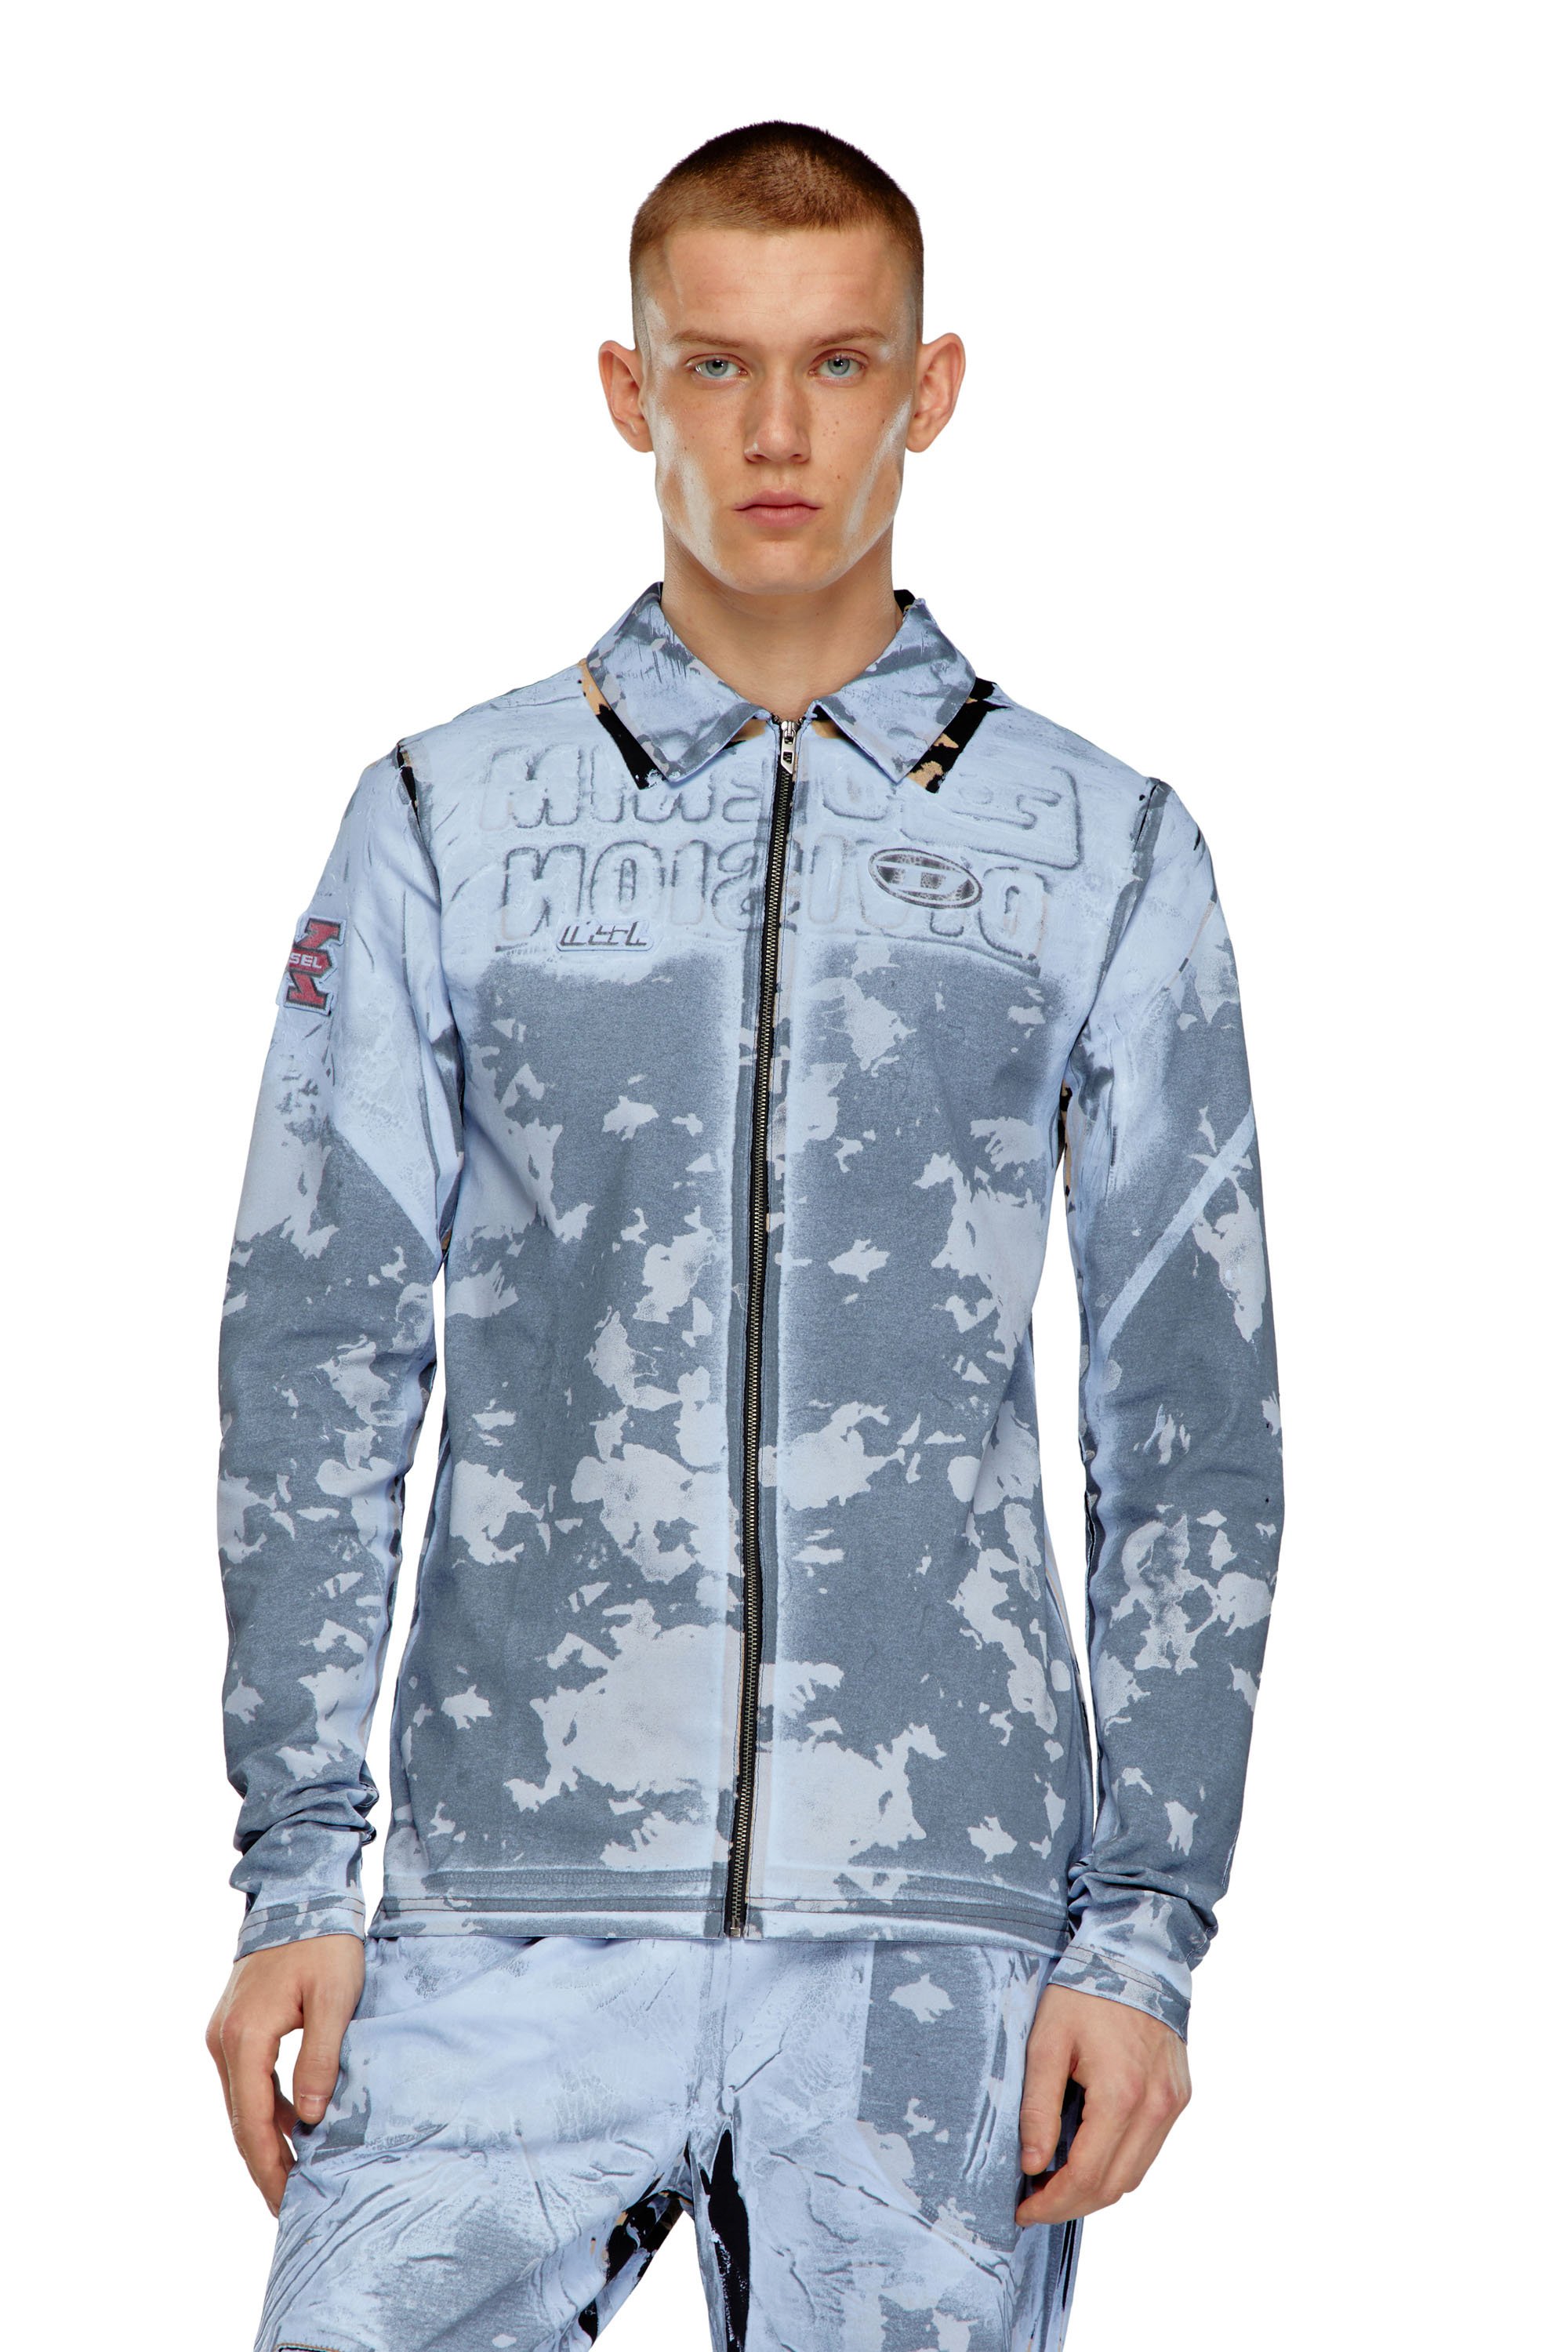 Diesel - S-CORSE-P1, Unisex Zip shirt in coated jersey in Blue - Image 5